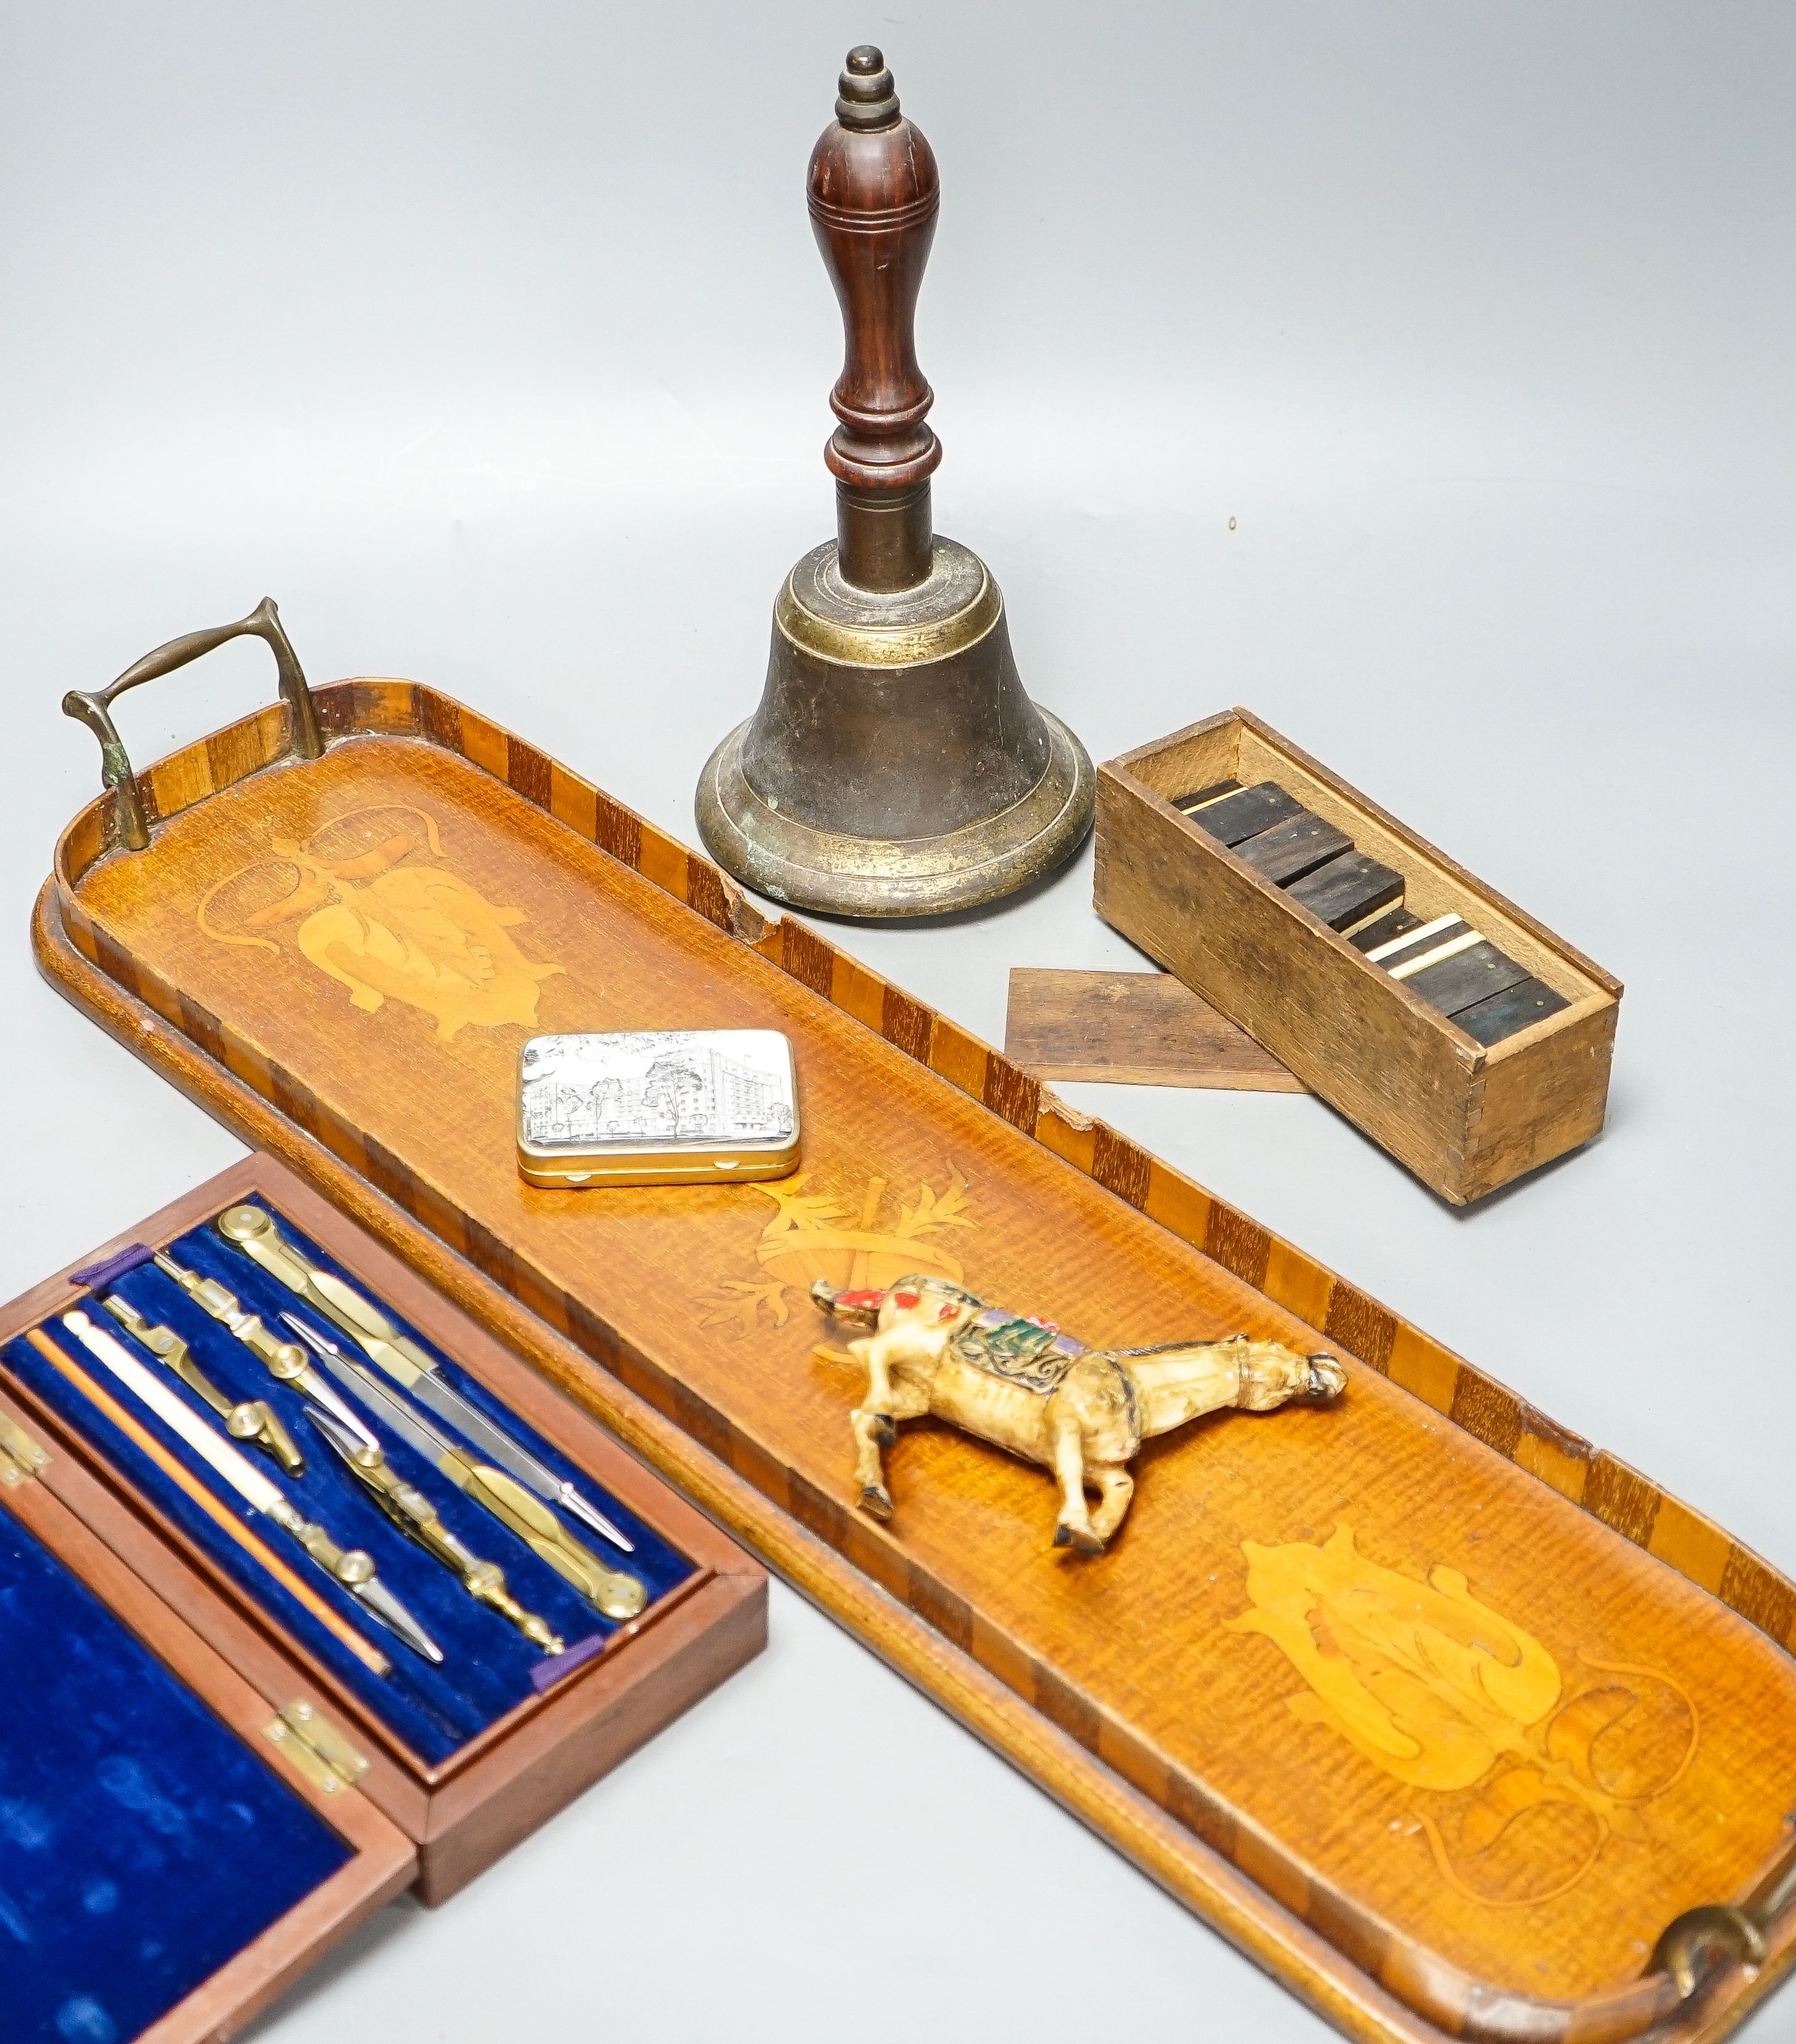 A Victorian bronze school bell, a tray and sundry items                                                                                                                                                                     